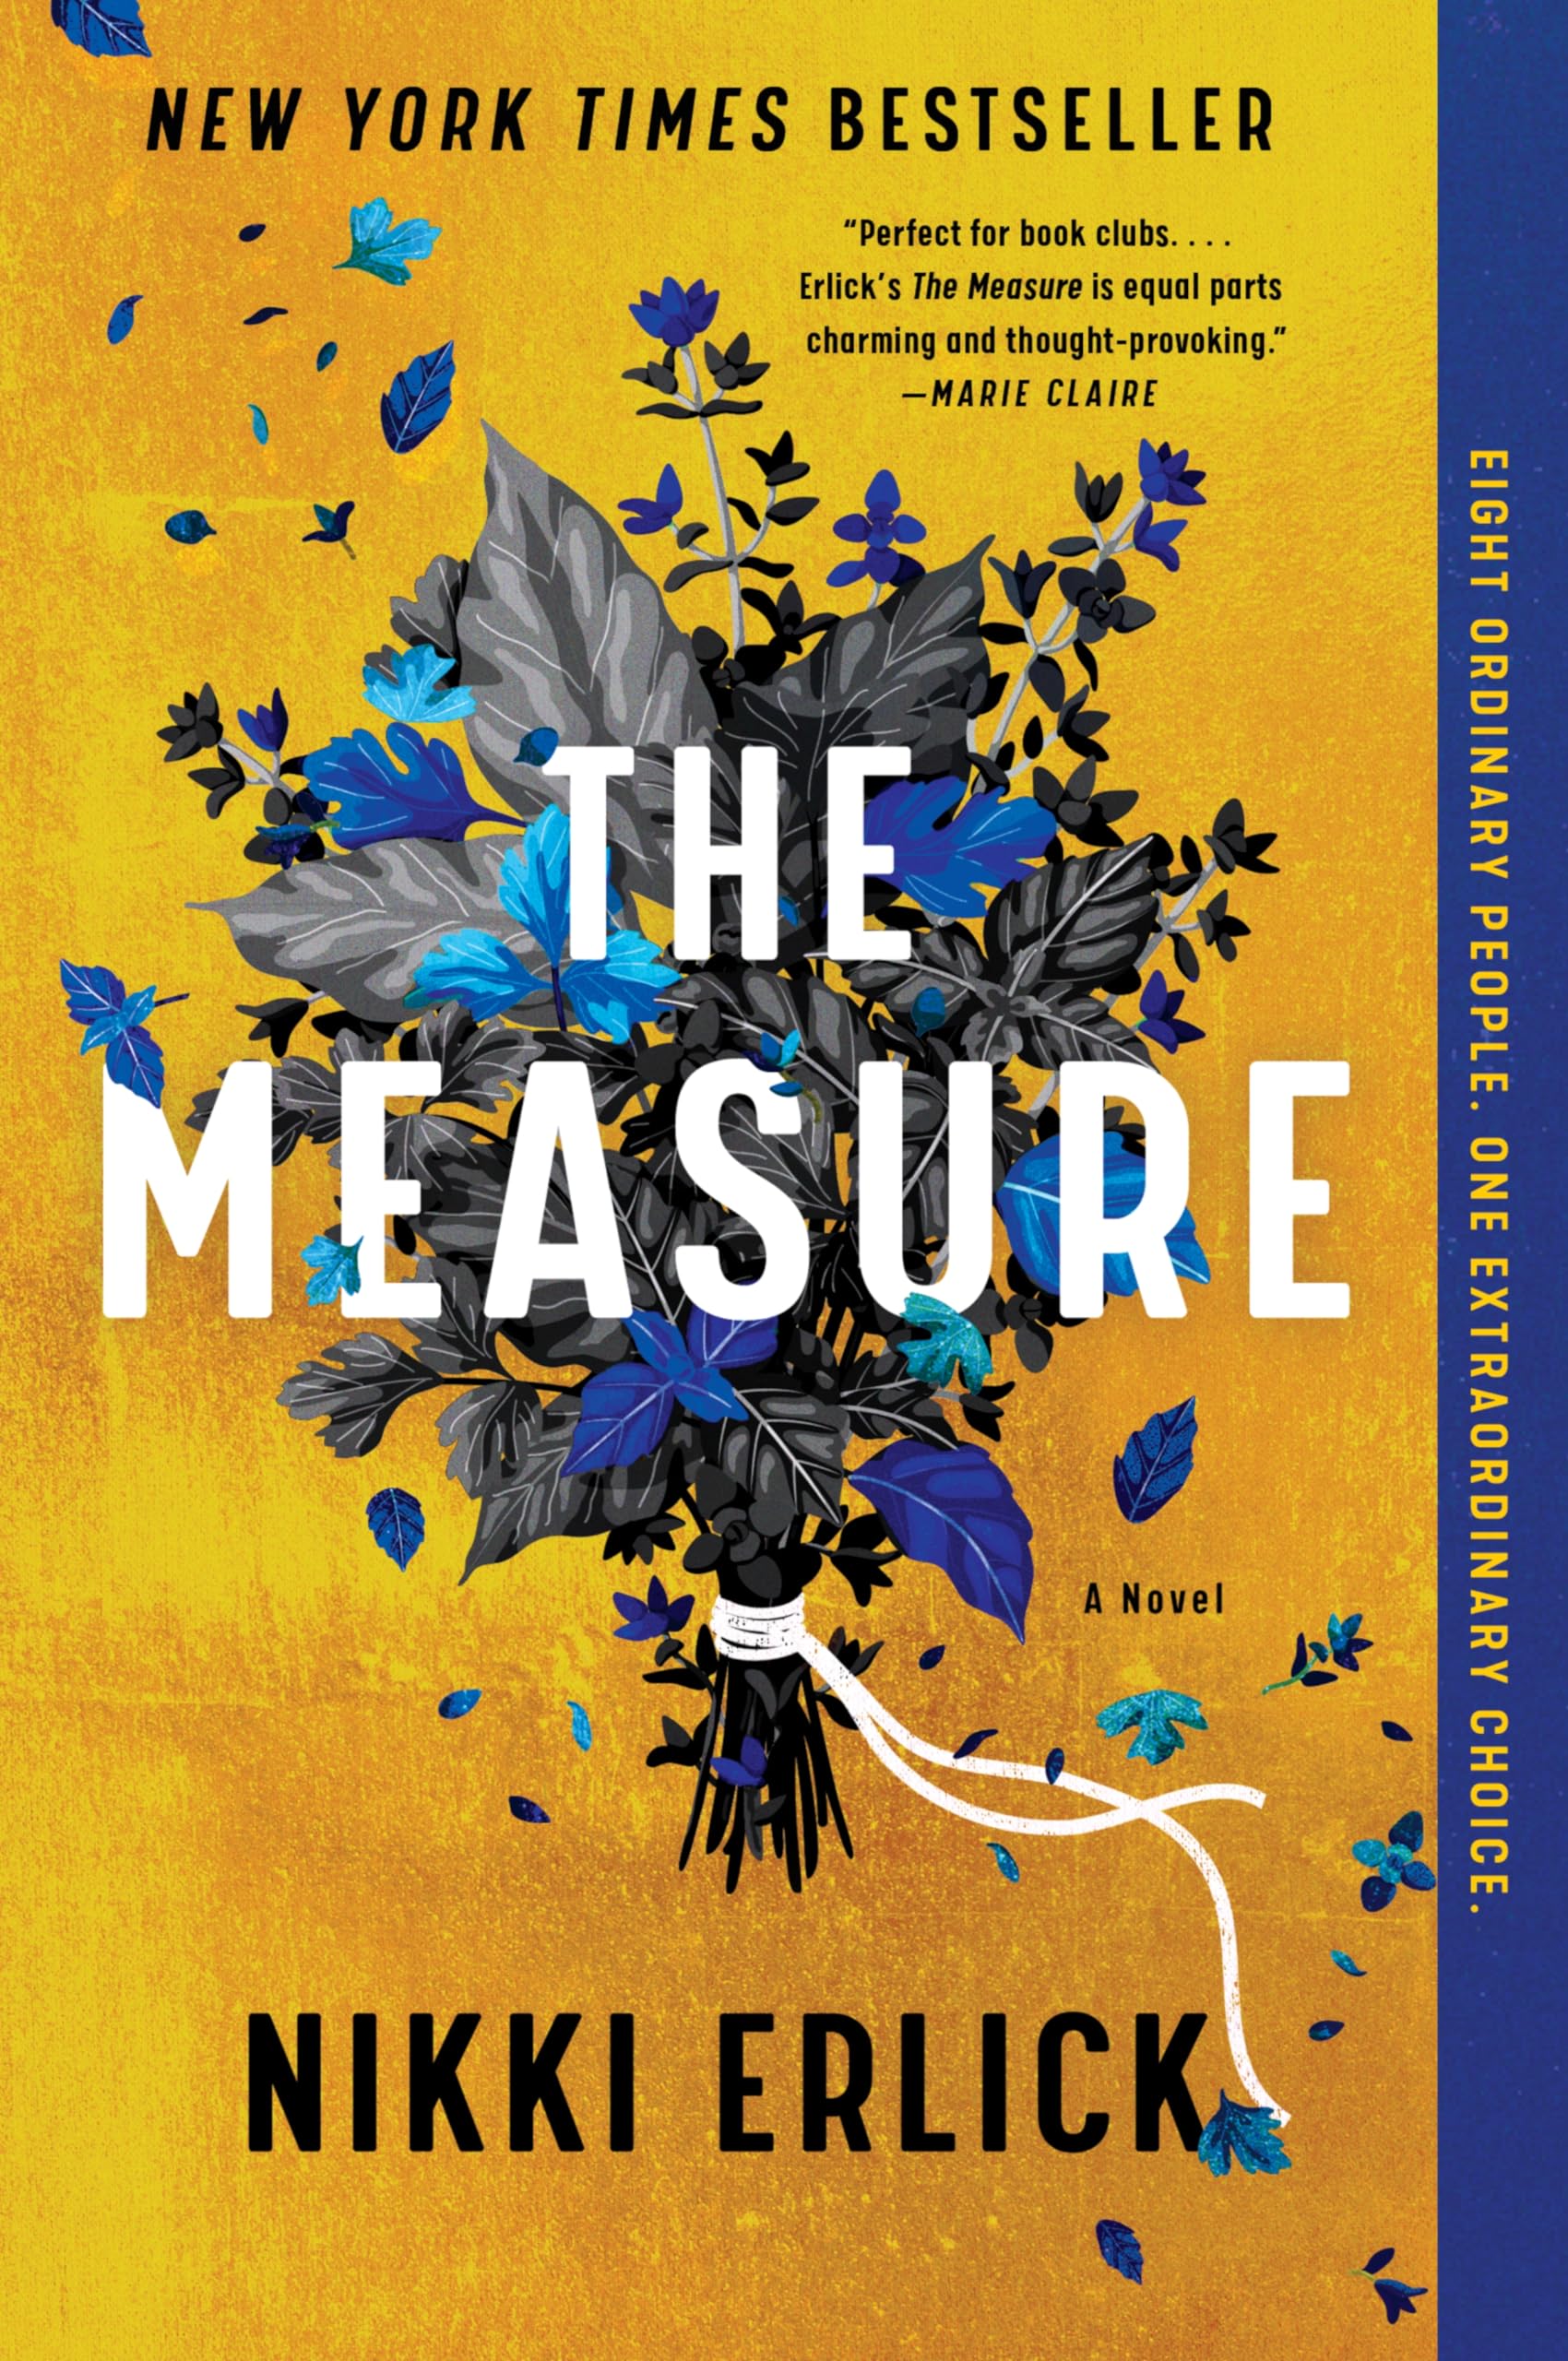 The Measure by Erlick, Nikki